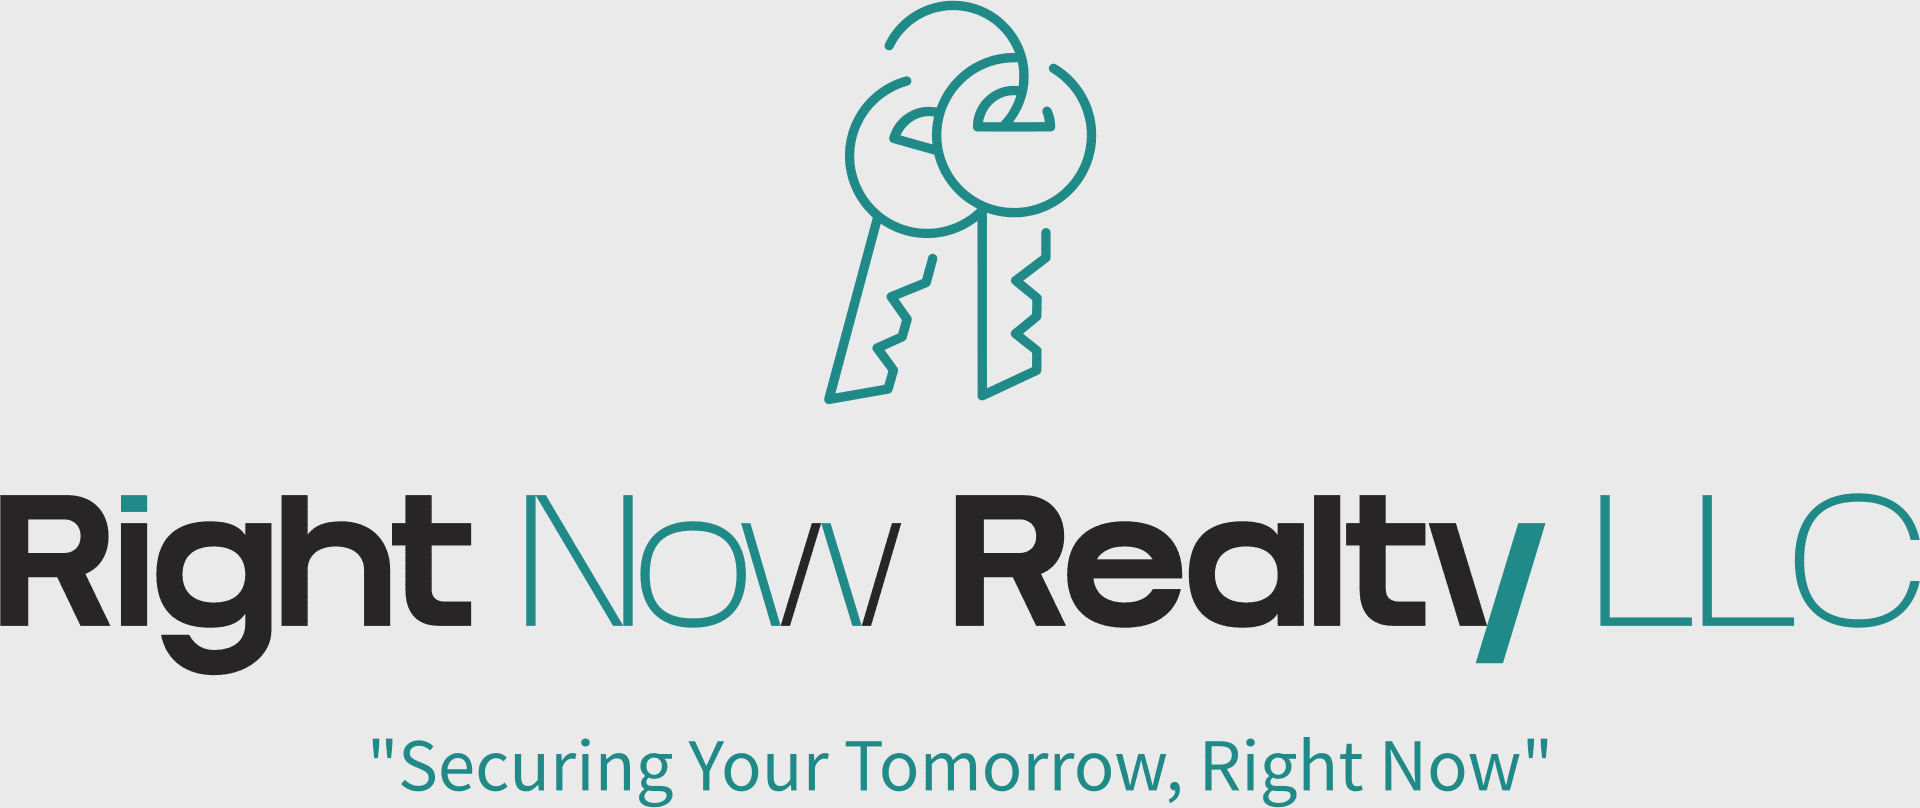 Right Now Realty LLC